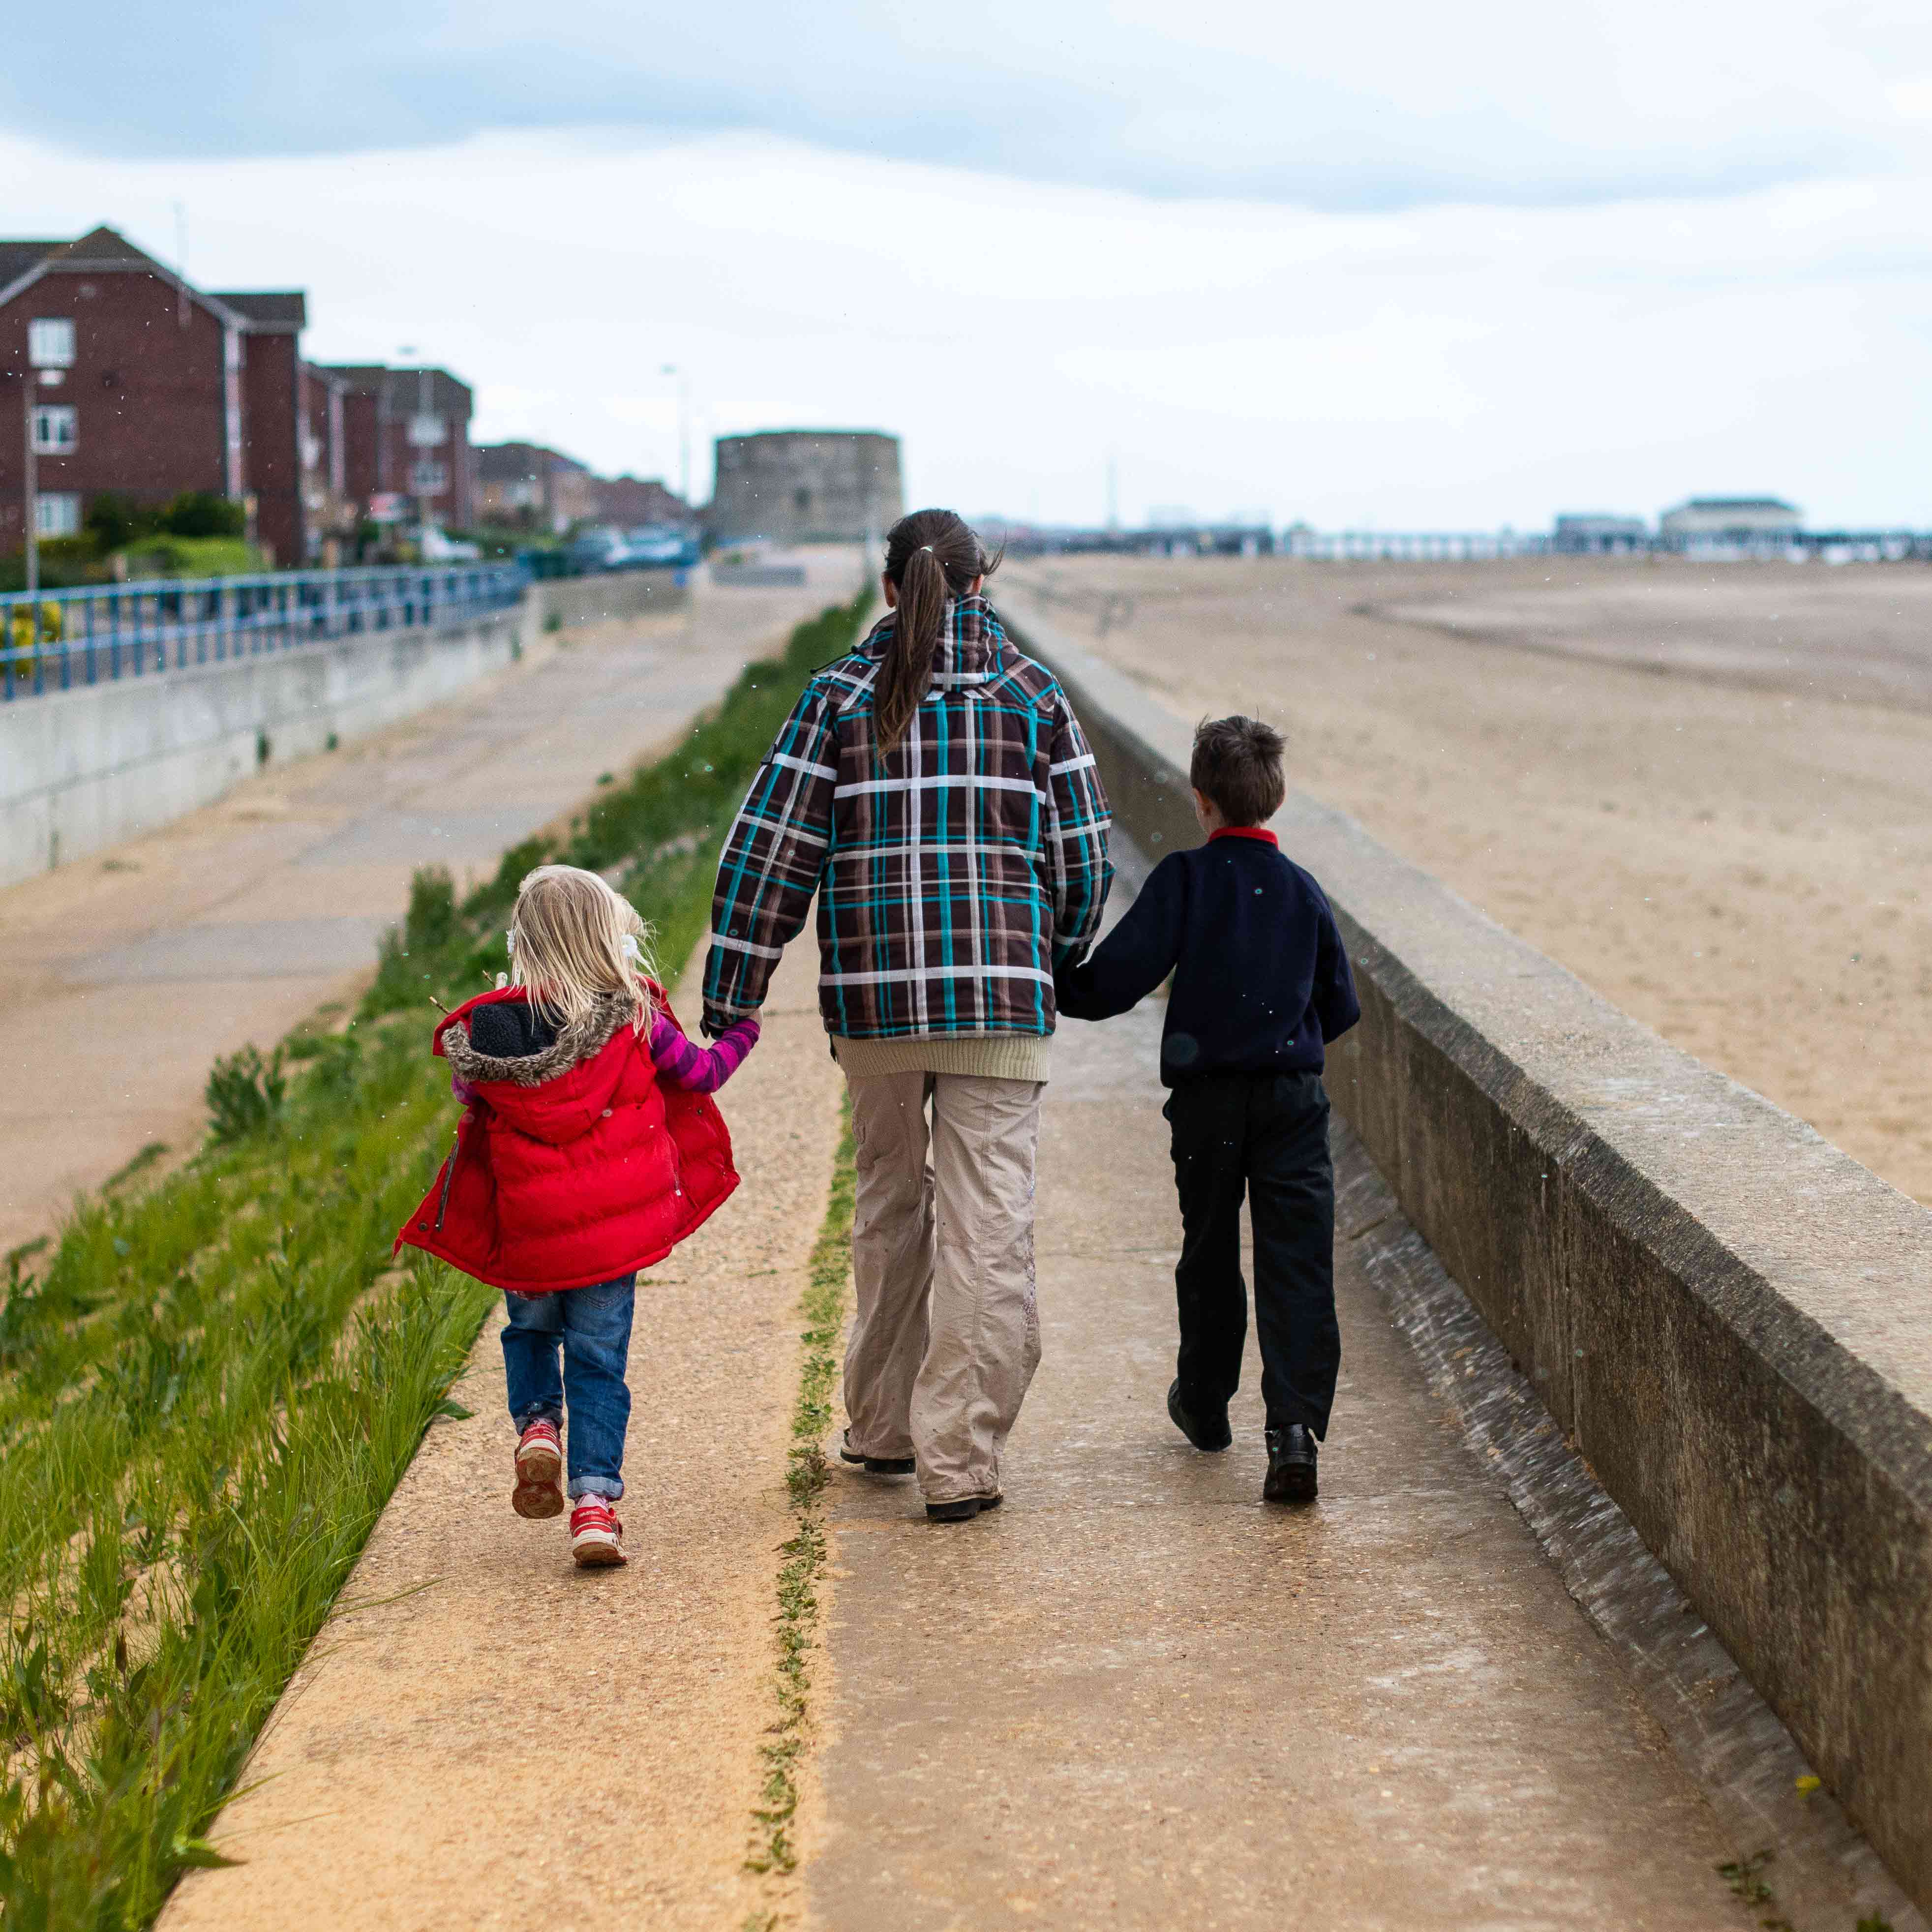 A woman and two young children walk along a seafront path in Jaywick, Essex